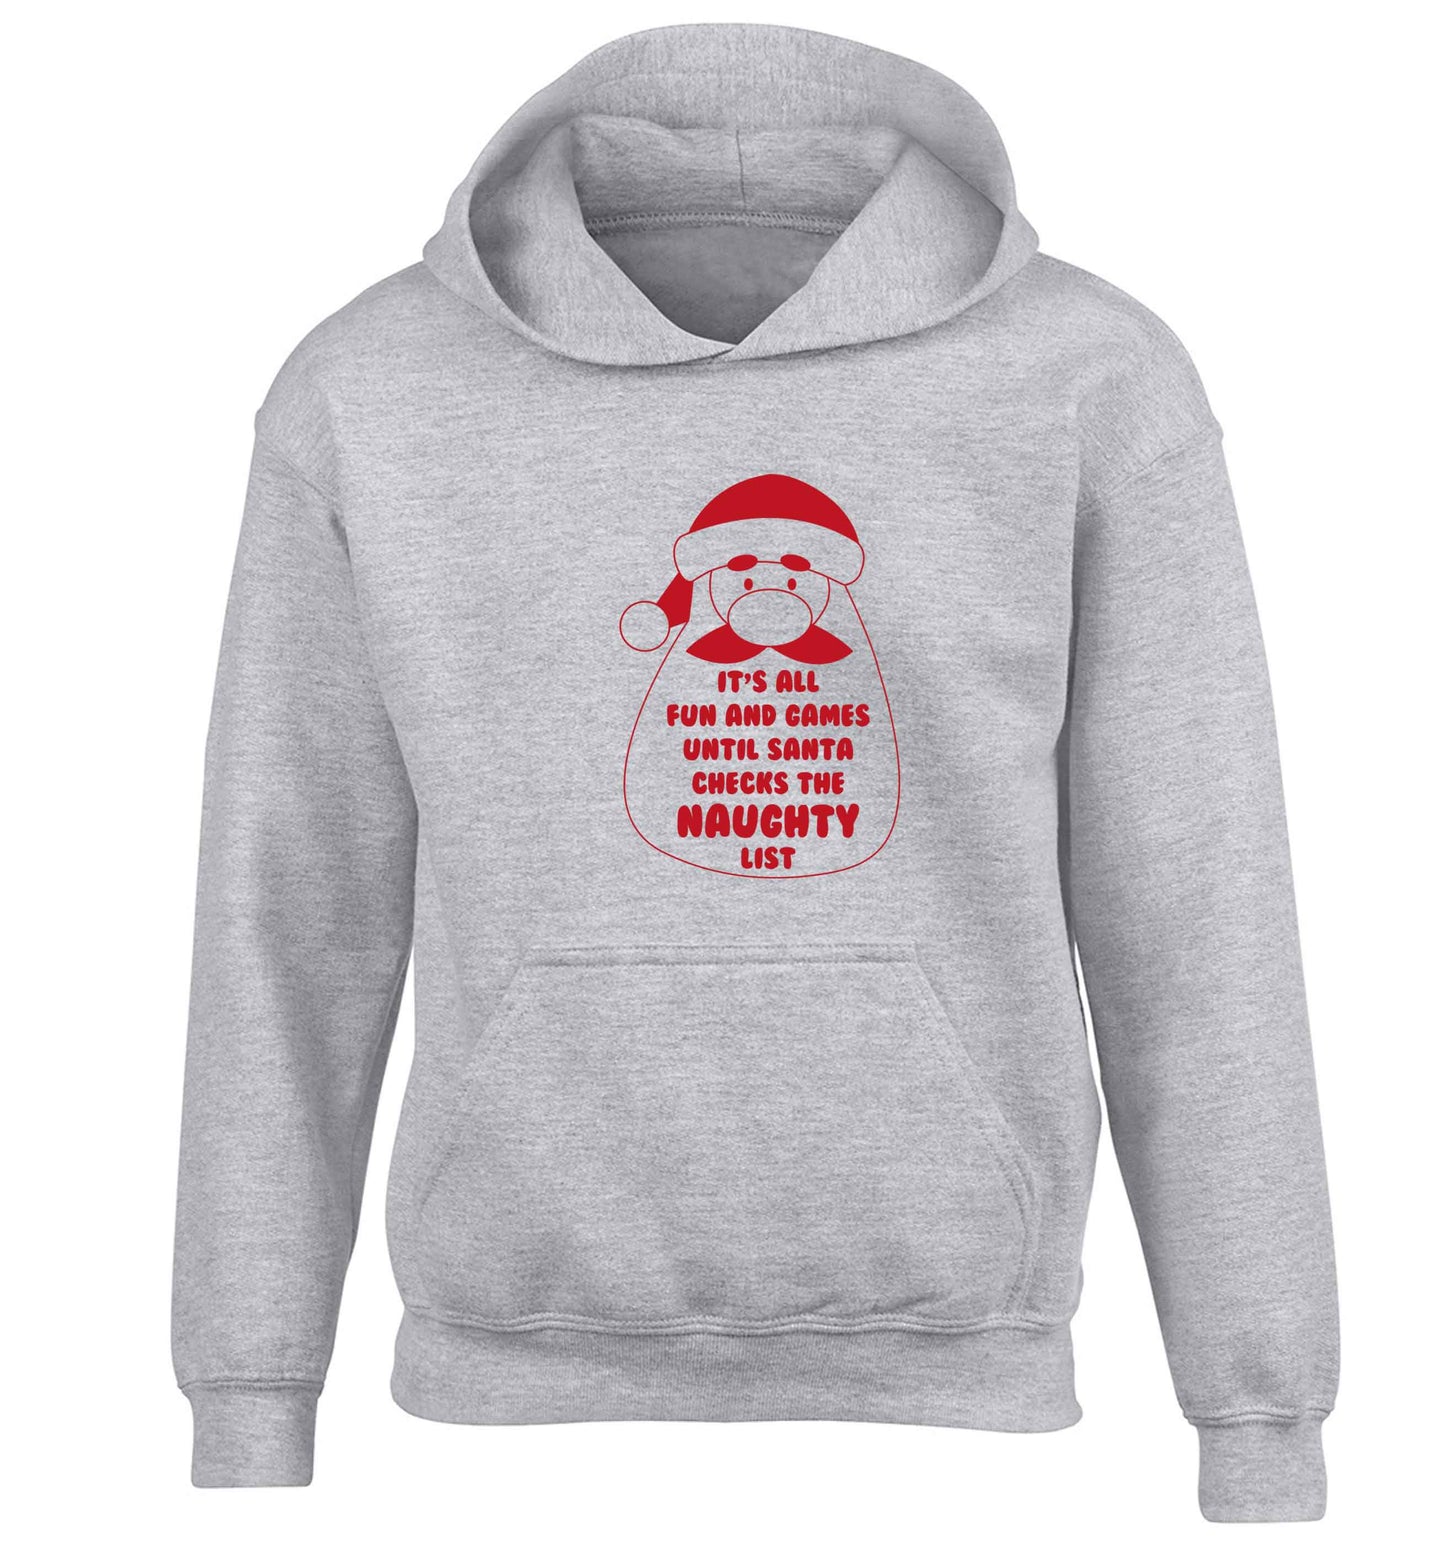 It's all fun and games until Santa checks the naughty list children's grey hoodie 12-13 Years